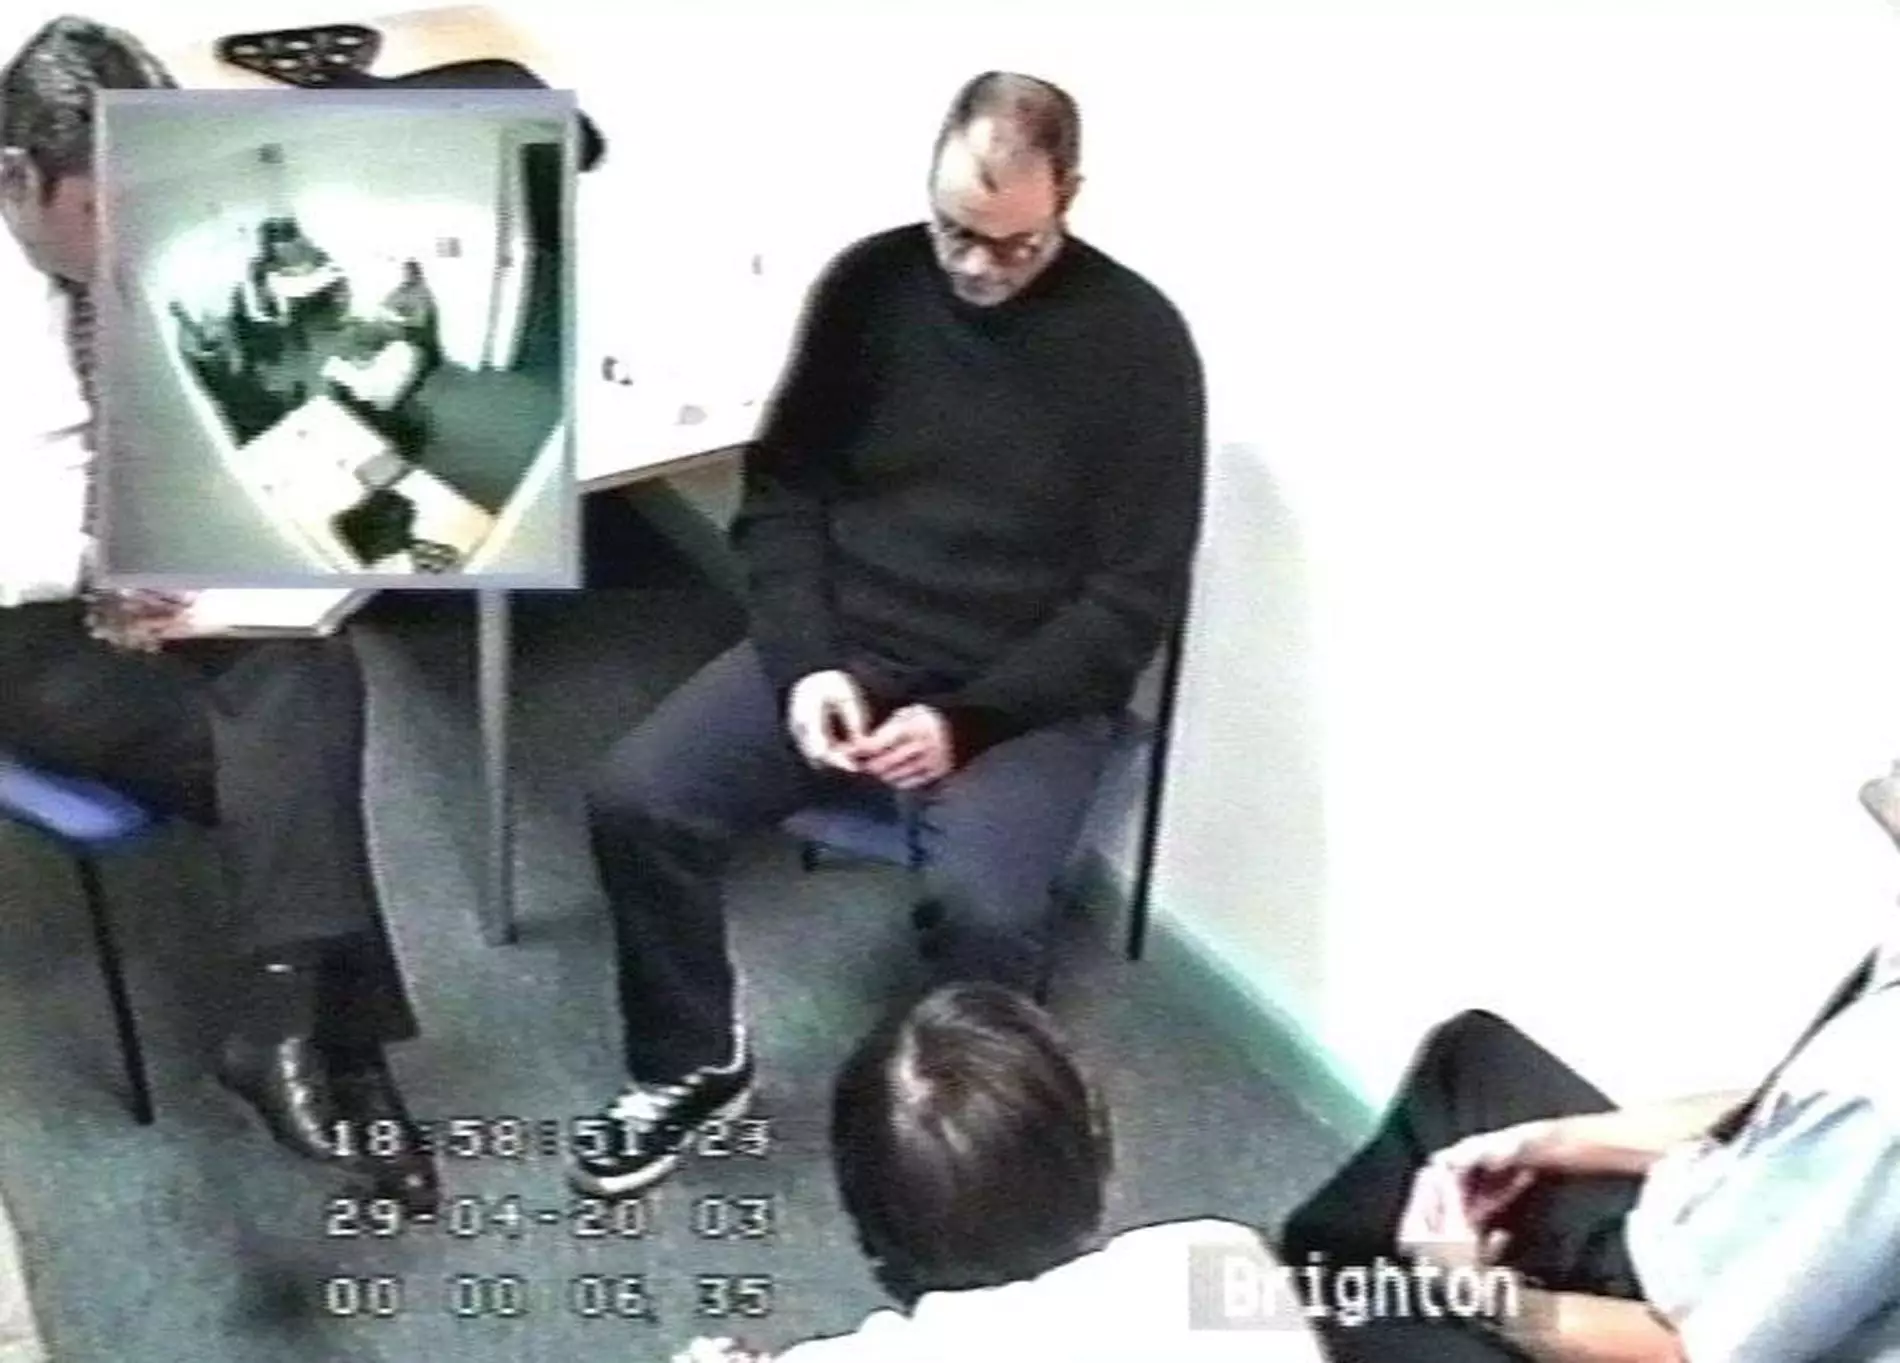 Graham Coutts being questioned in 2004 (